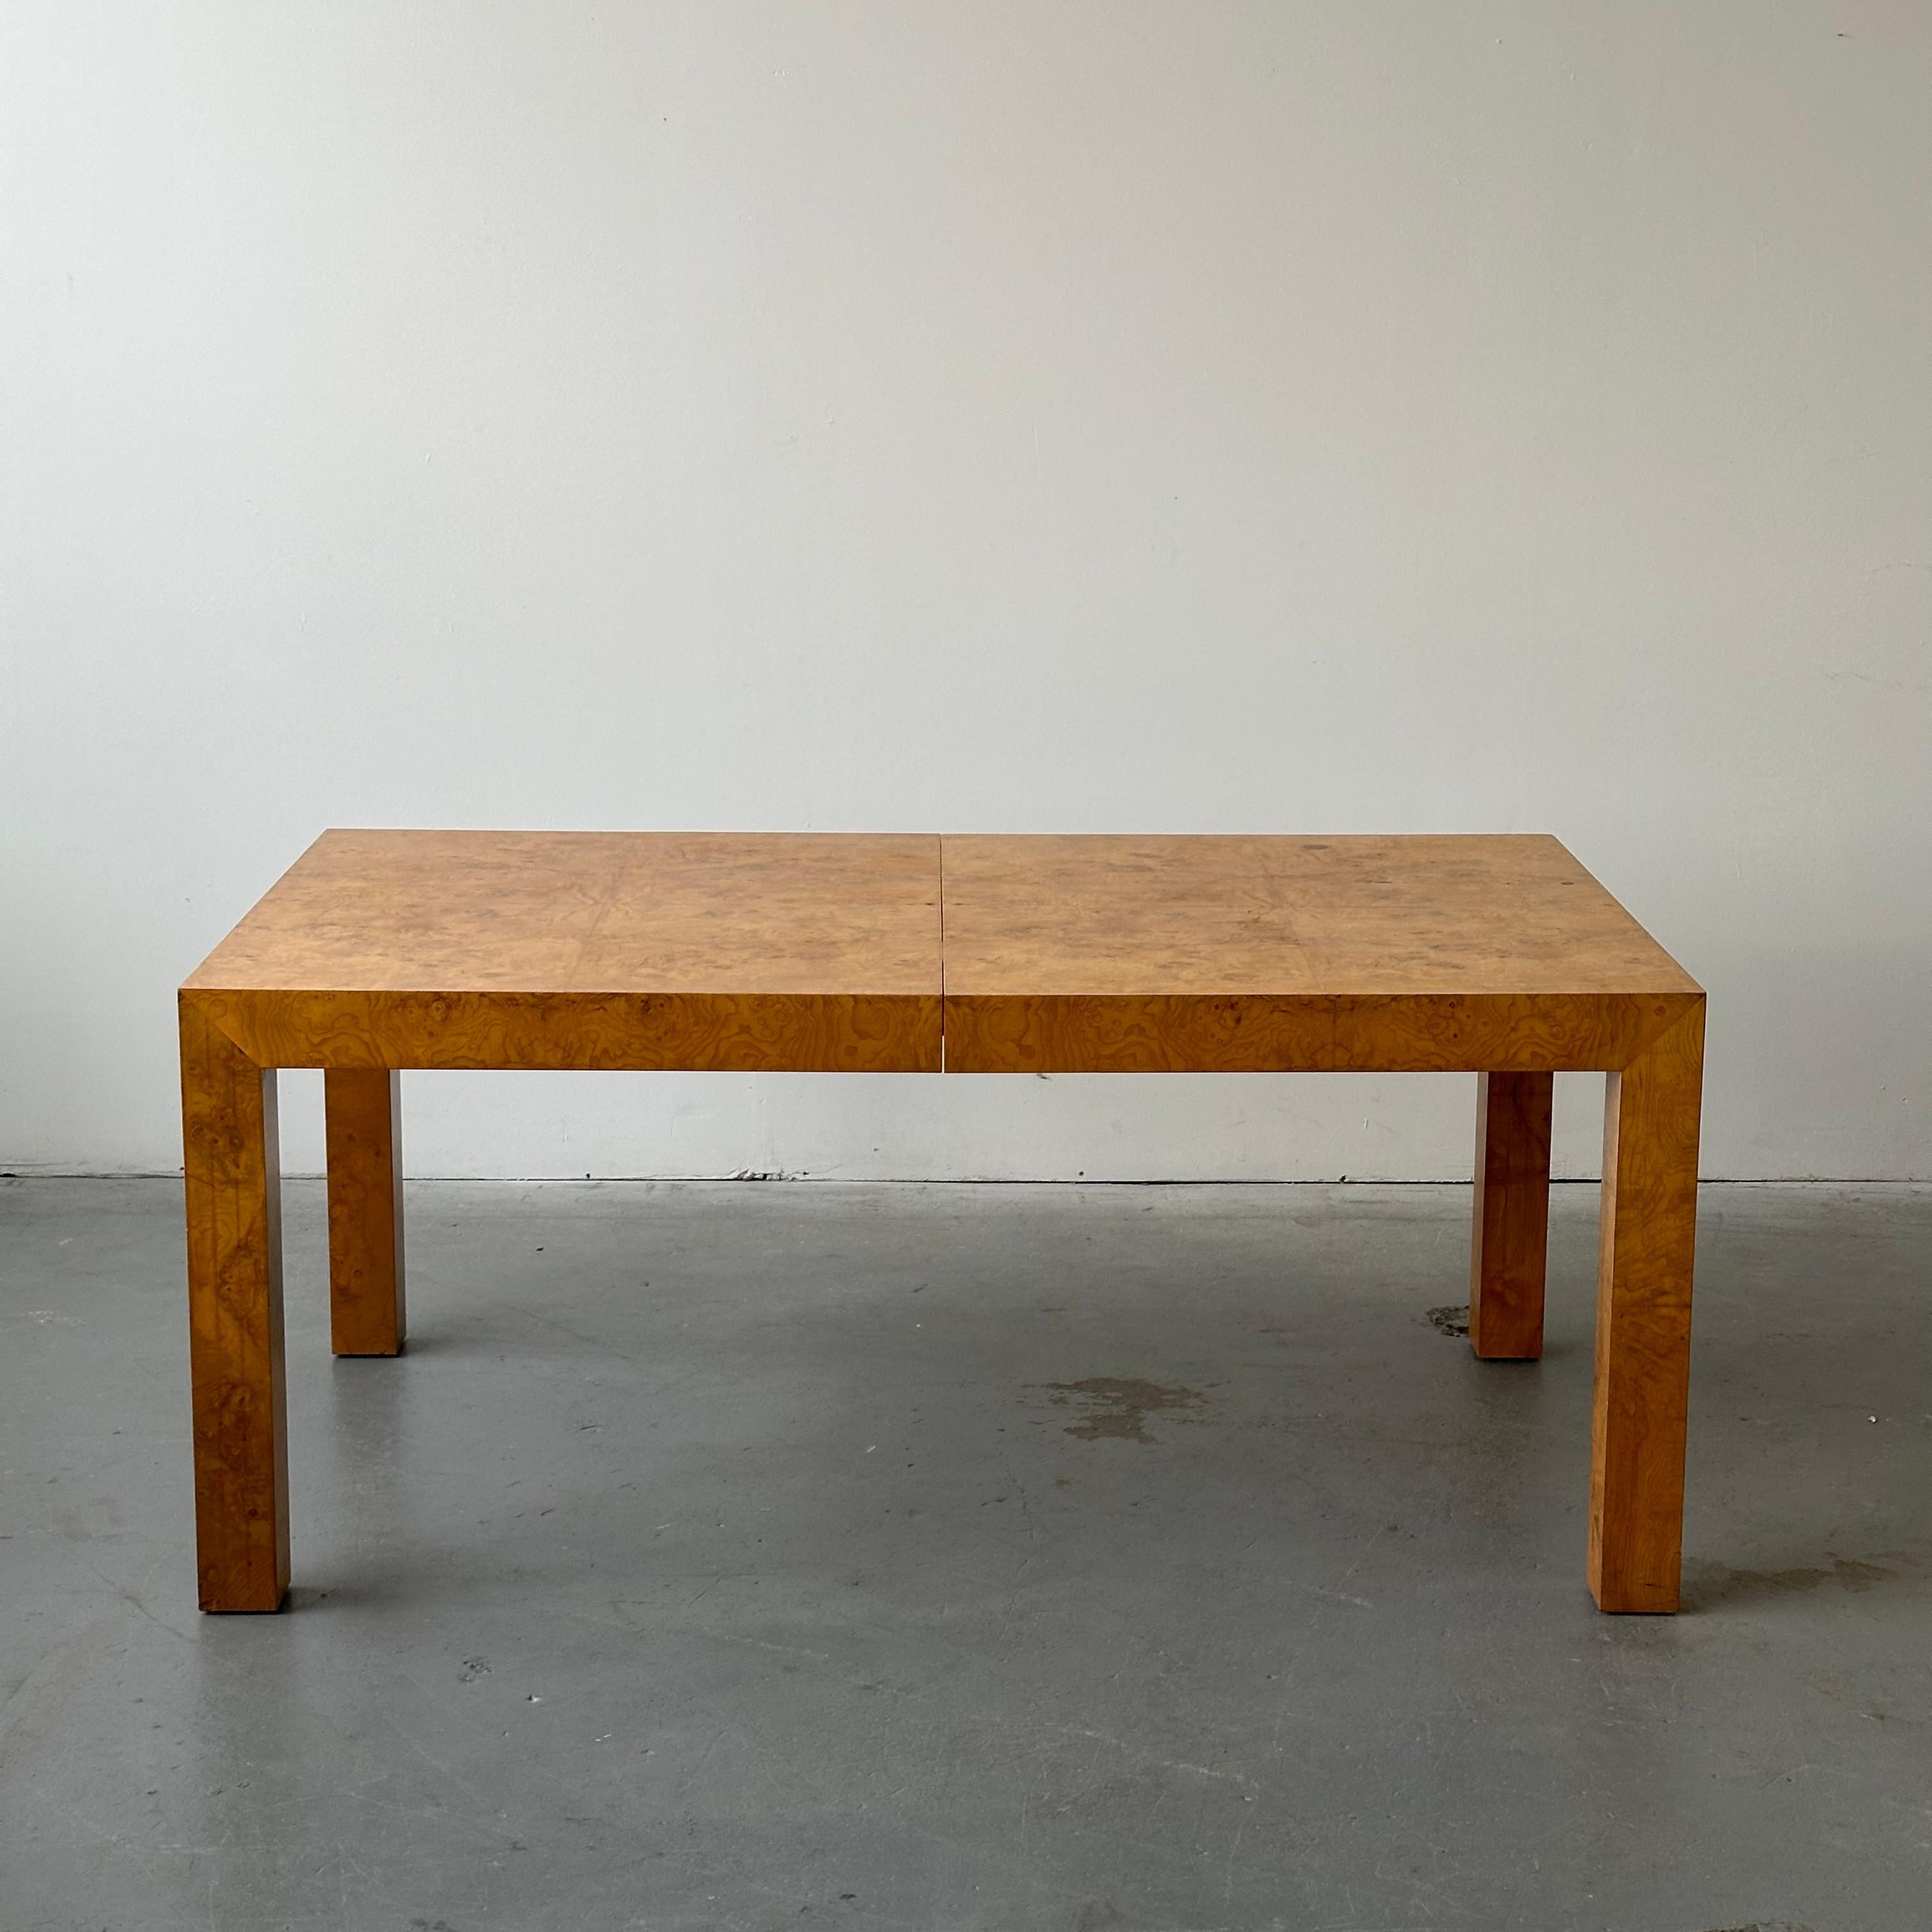 c. 1970s. Though this table was intended to extend, we do not have any additional leaves. There is also some wear to the surface of the table and some chips present on the legs